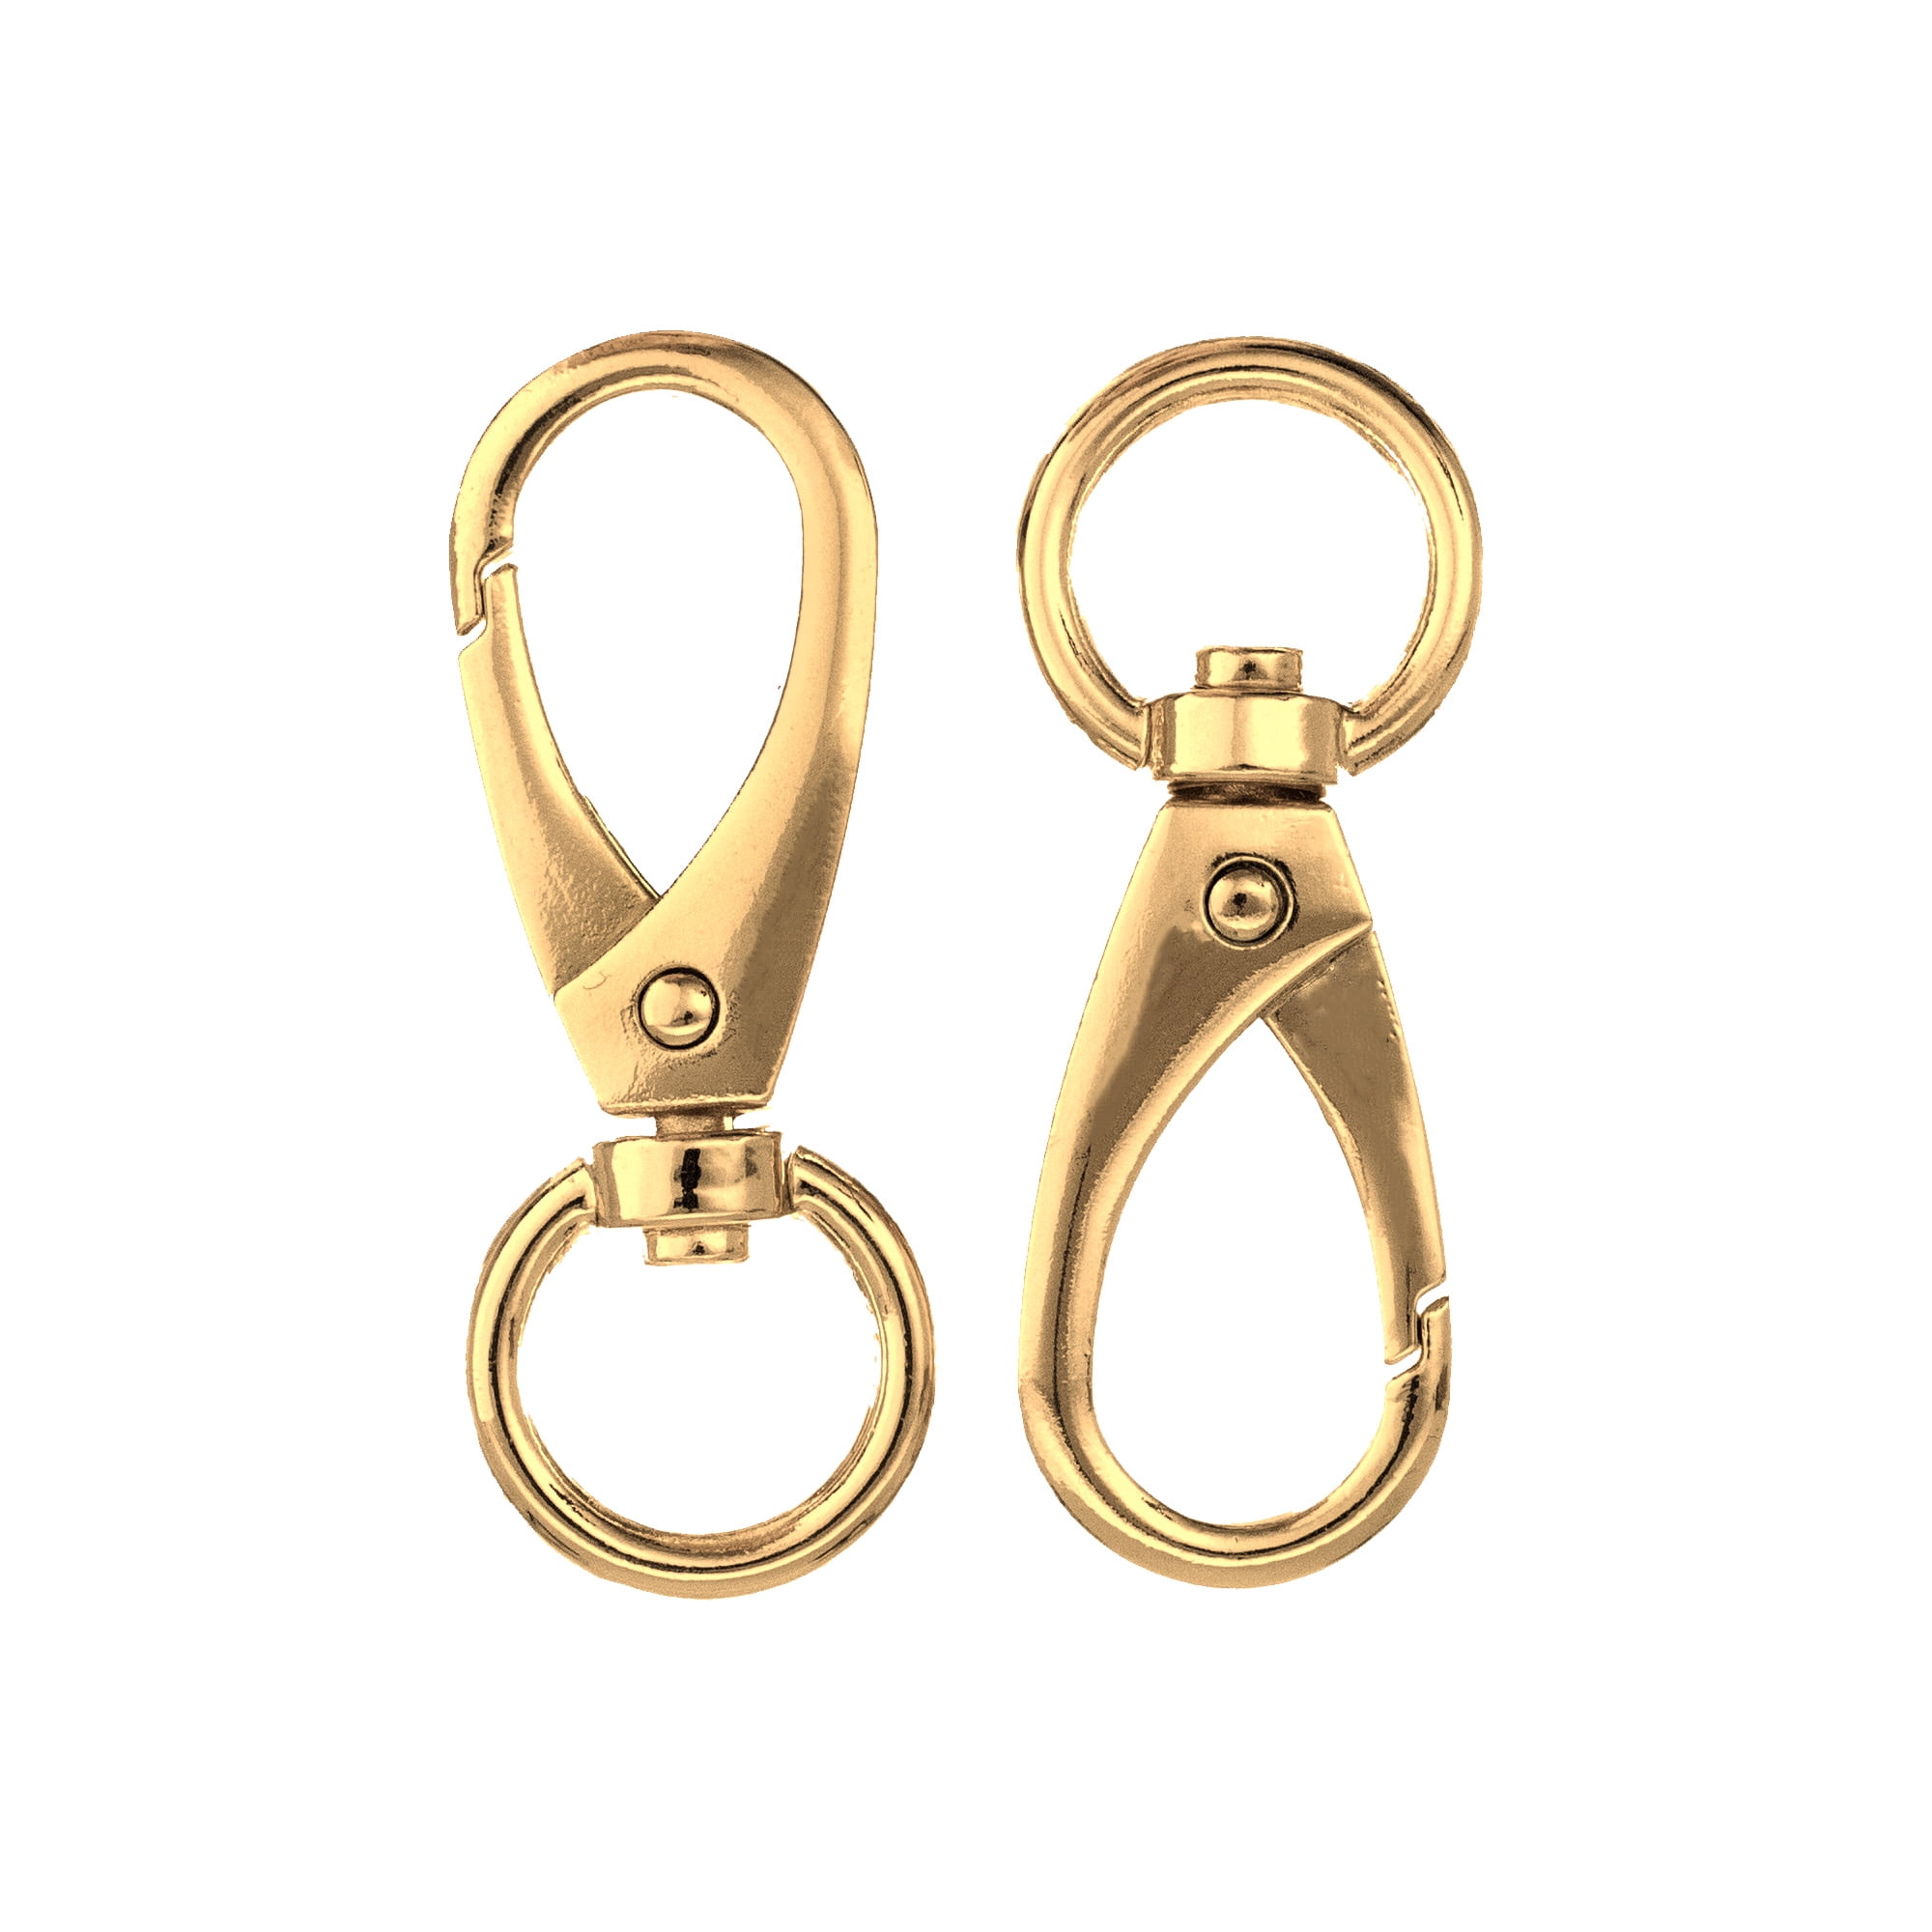 2xSolid Brass Square Swivel Trigger Clip Snap Hook Bag Lobster Clasp 12x57mm 